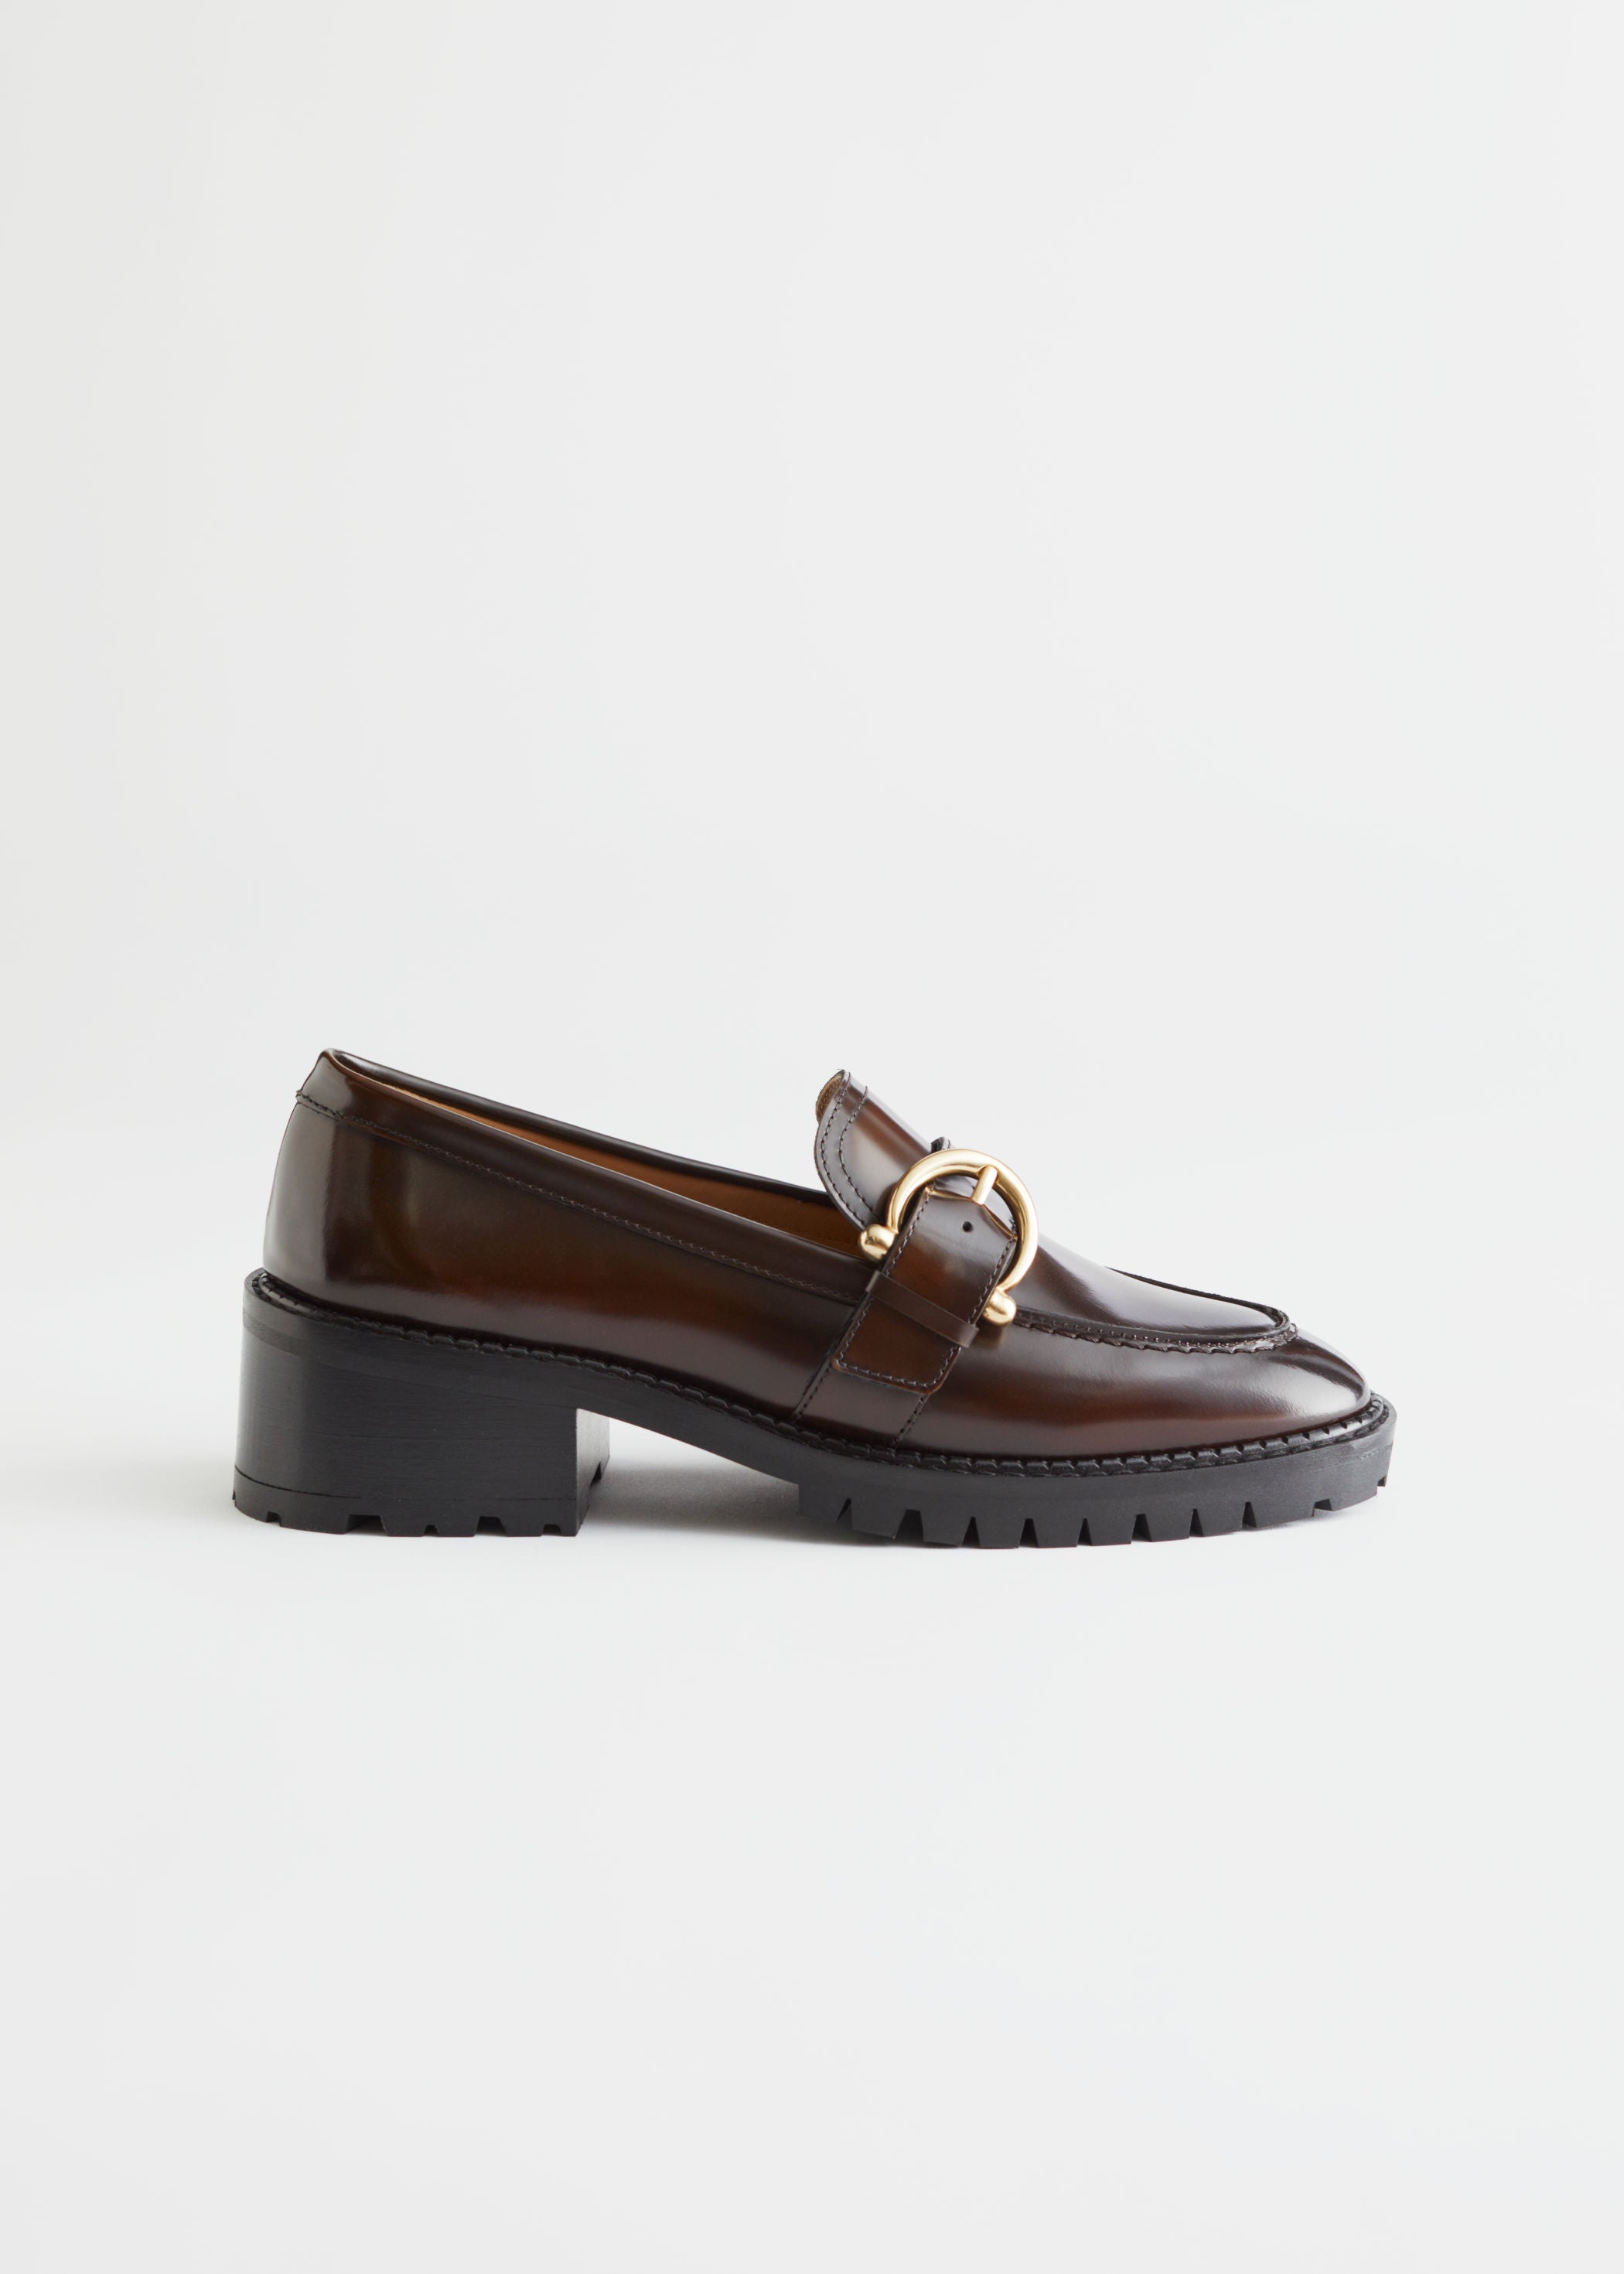 & other stories loafers